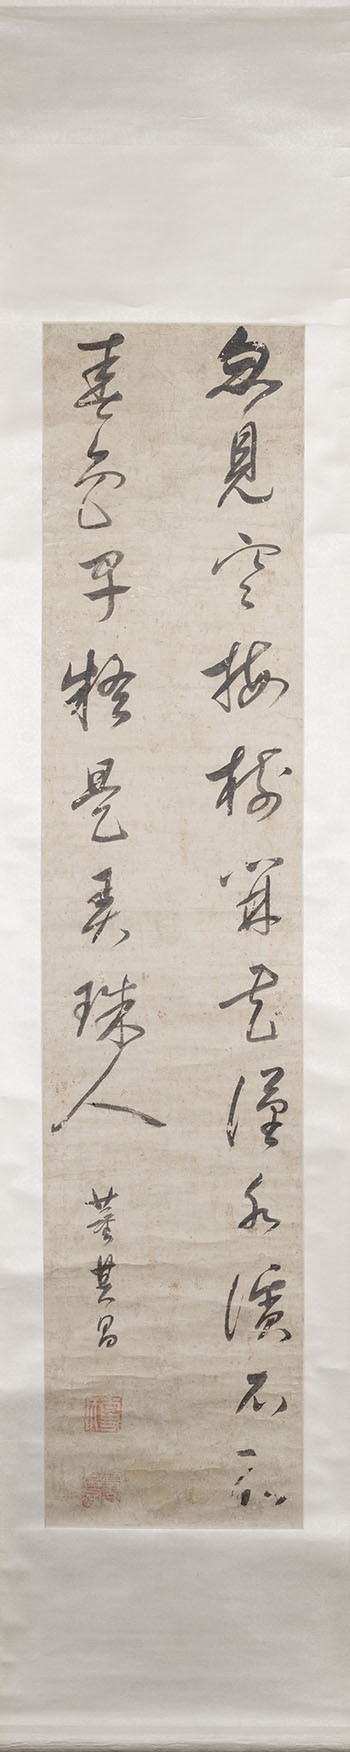 Calligraphy by After Dong Qichang vendu pour $2,125